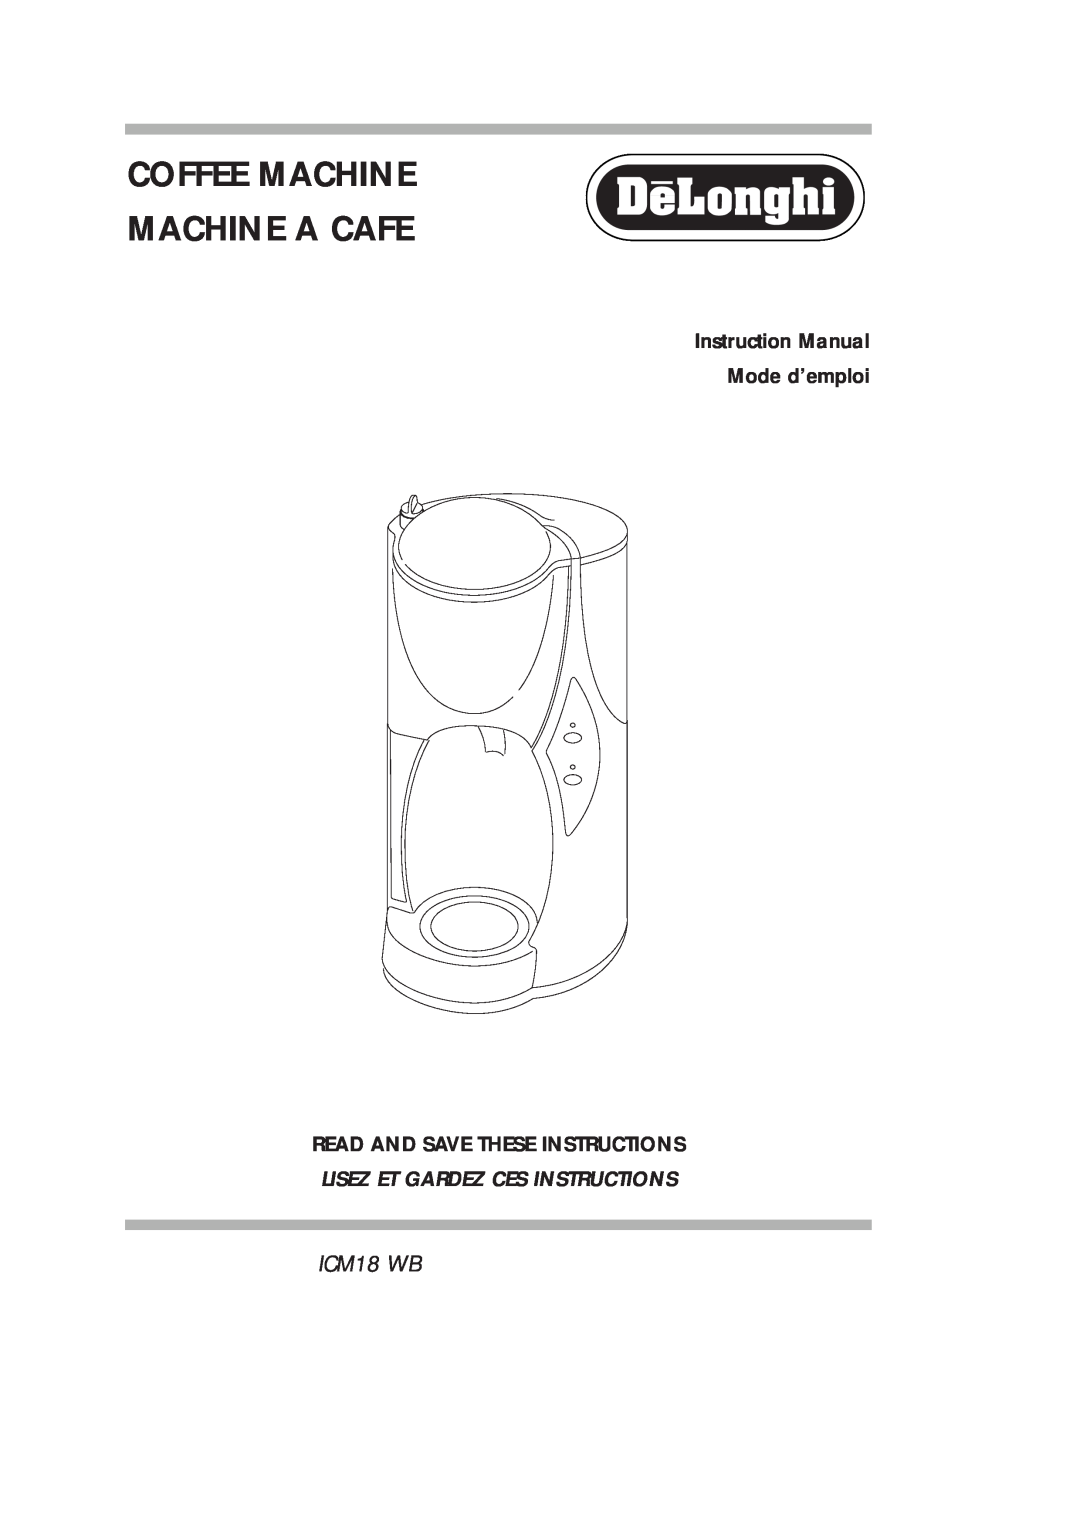 DeLonghi ICM18 WB instruction manual Read And Save These Instructions, Coffee Machine Machine A Cafe 